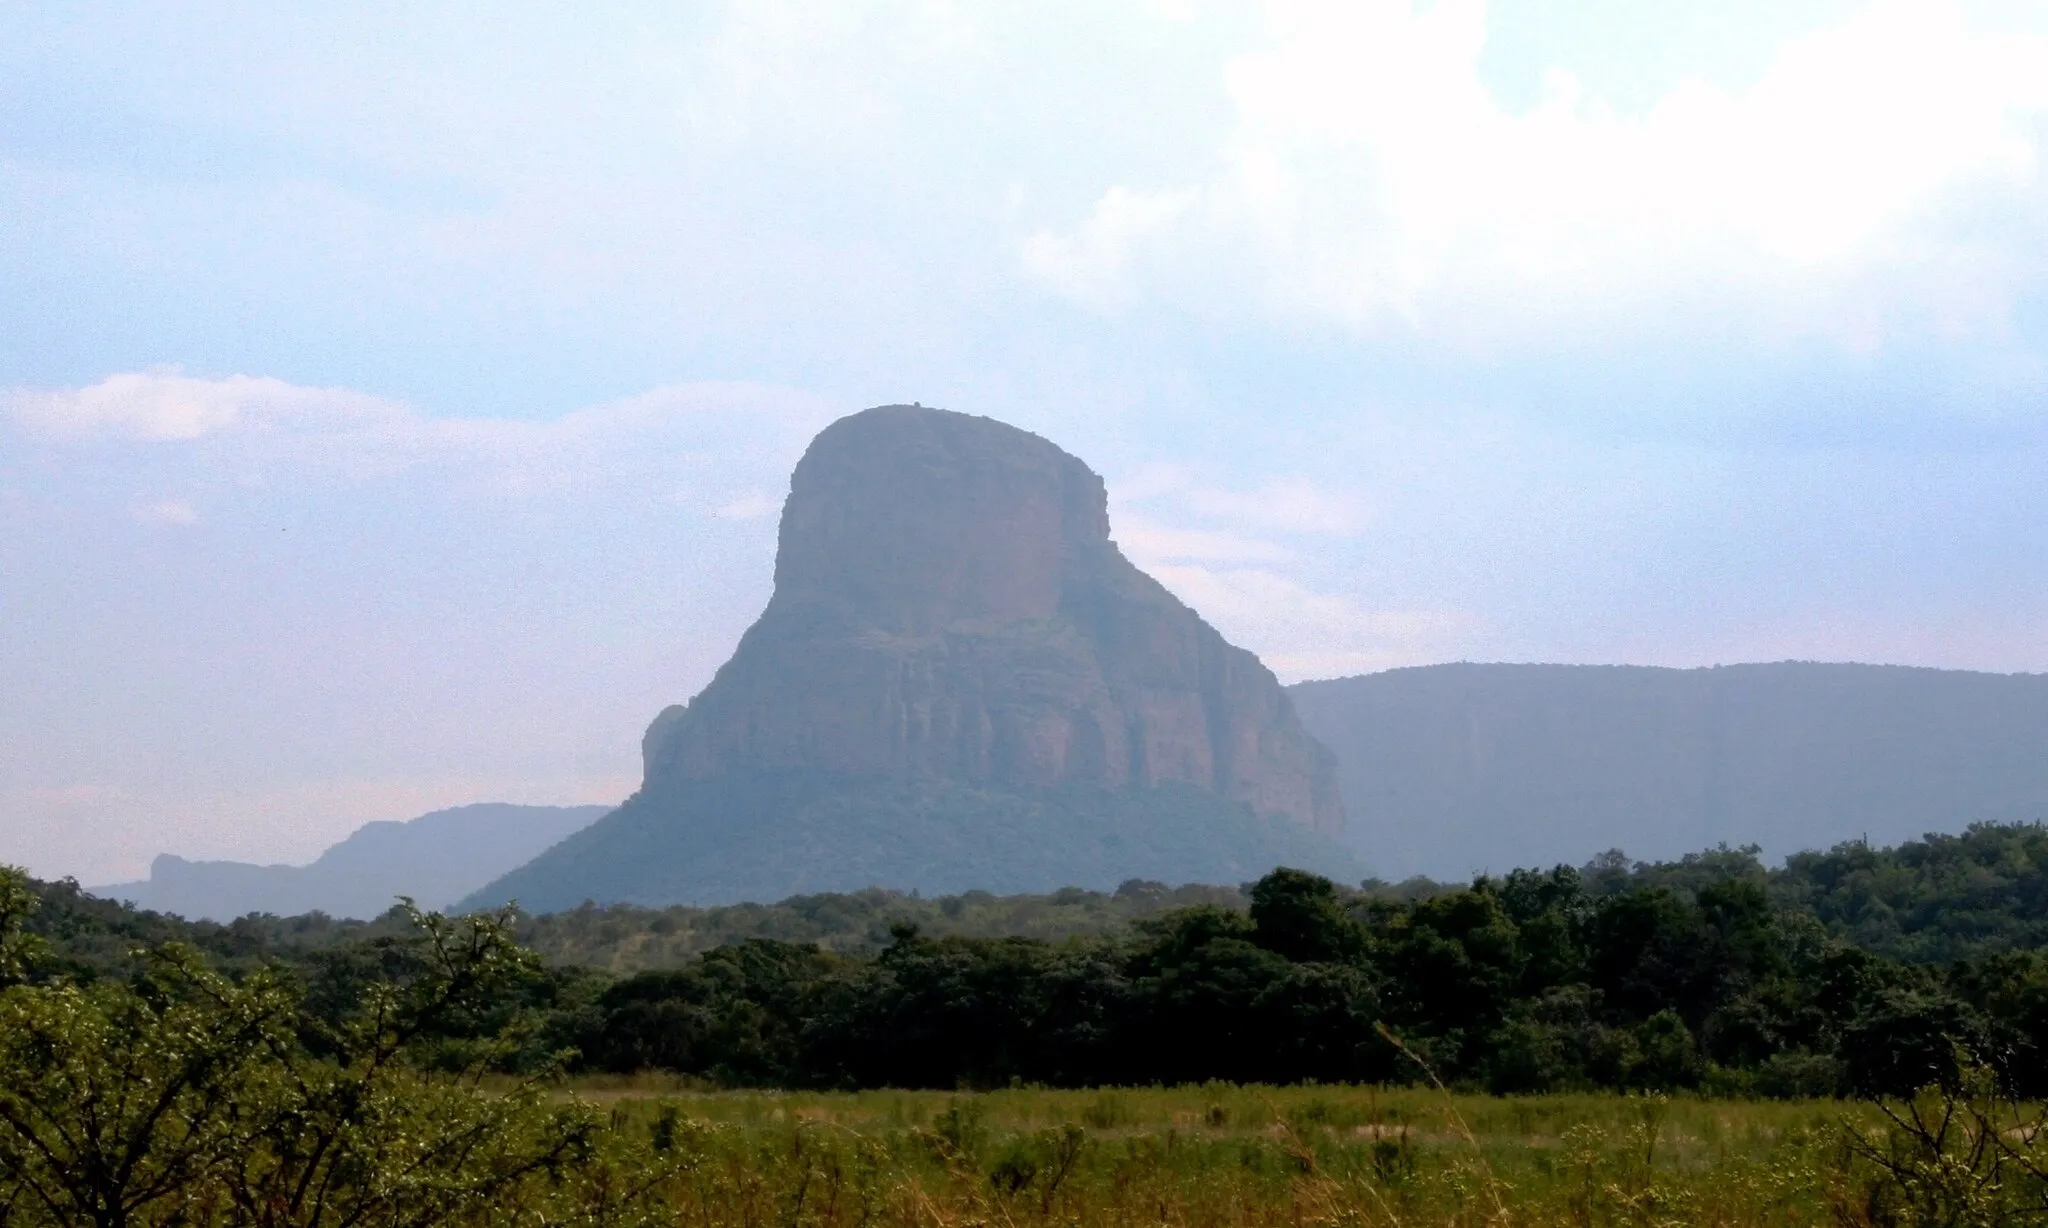 Photo showing: Hanglippunt (reaching 1,768m), a promontory of the Hanglipberge which forms an eastern escarpment of the Waterberg in Limpopo, South Africa. The promontory is located inside the Entabeni Conservancy, near Sterkrivier, on the eastern boundary of the Waterberg Biosphere.